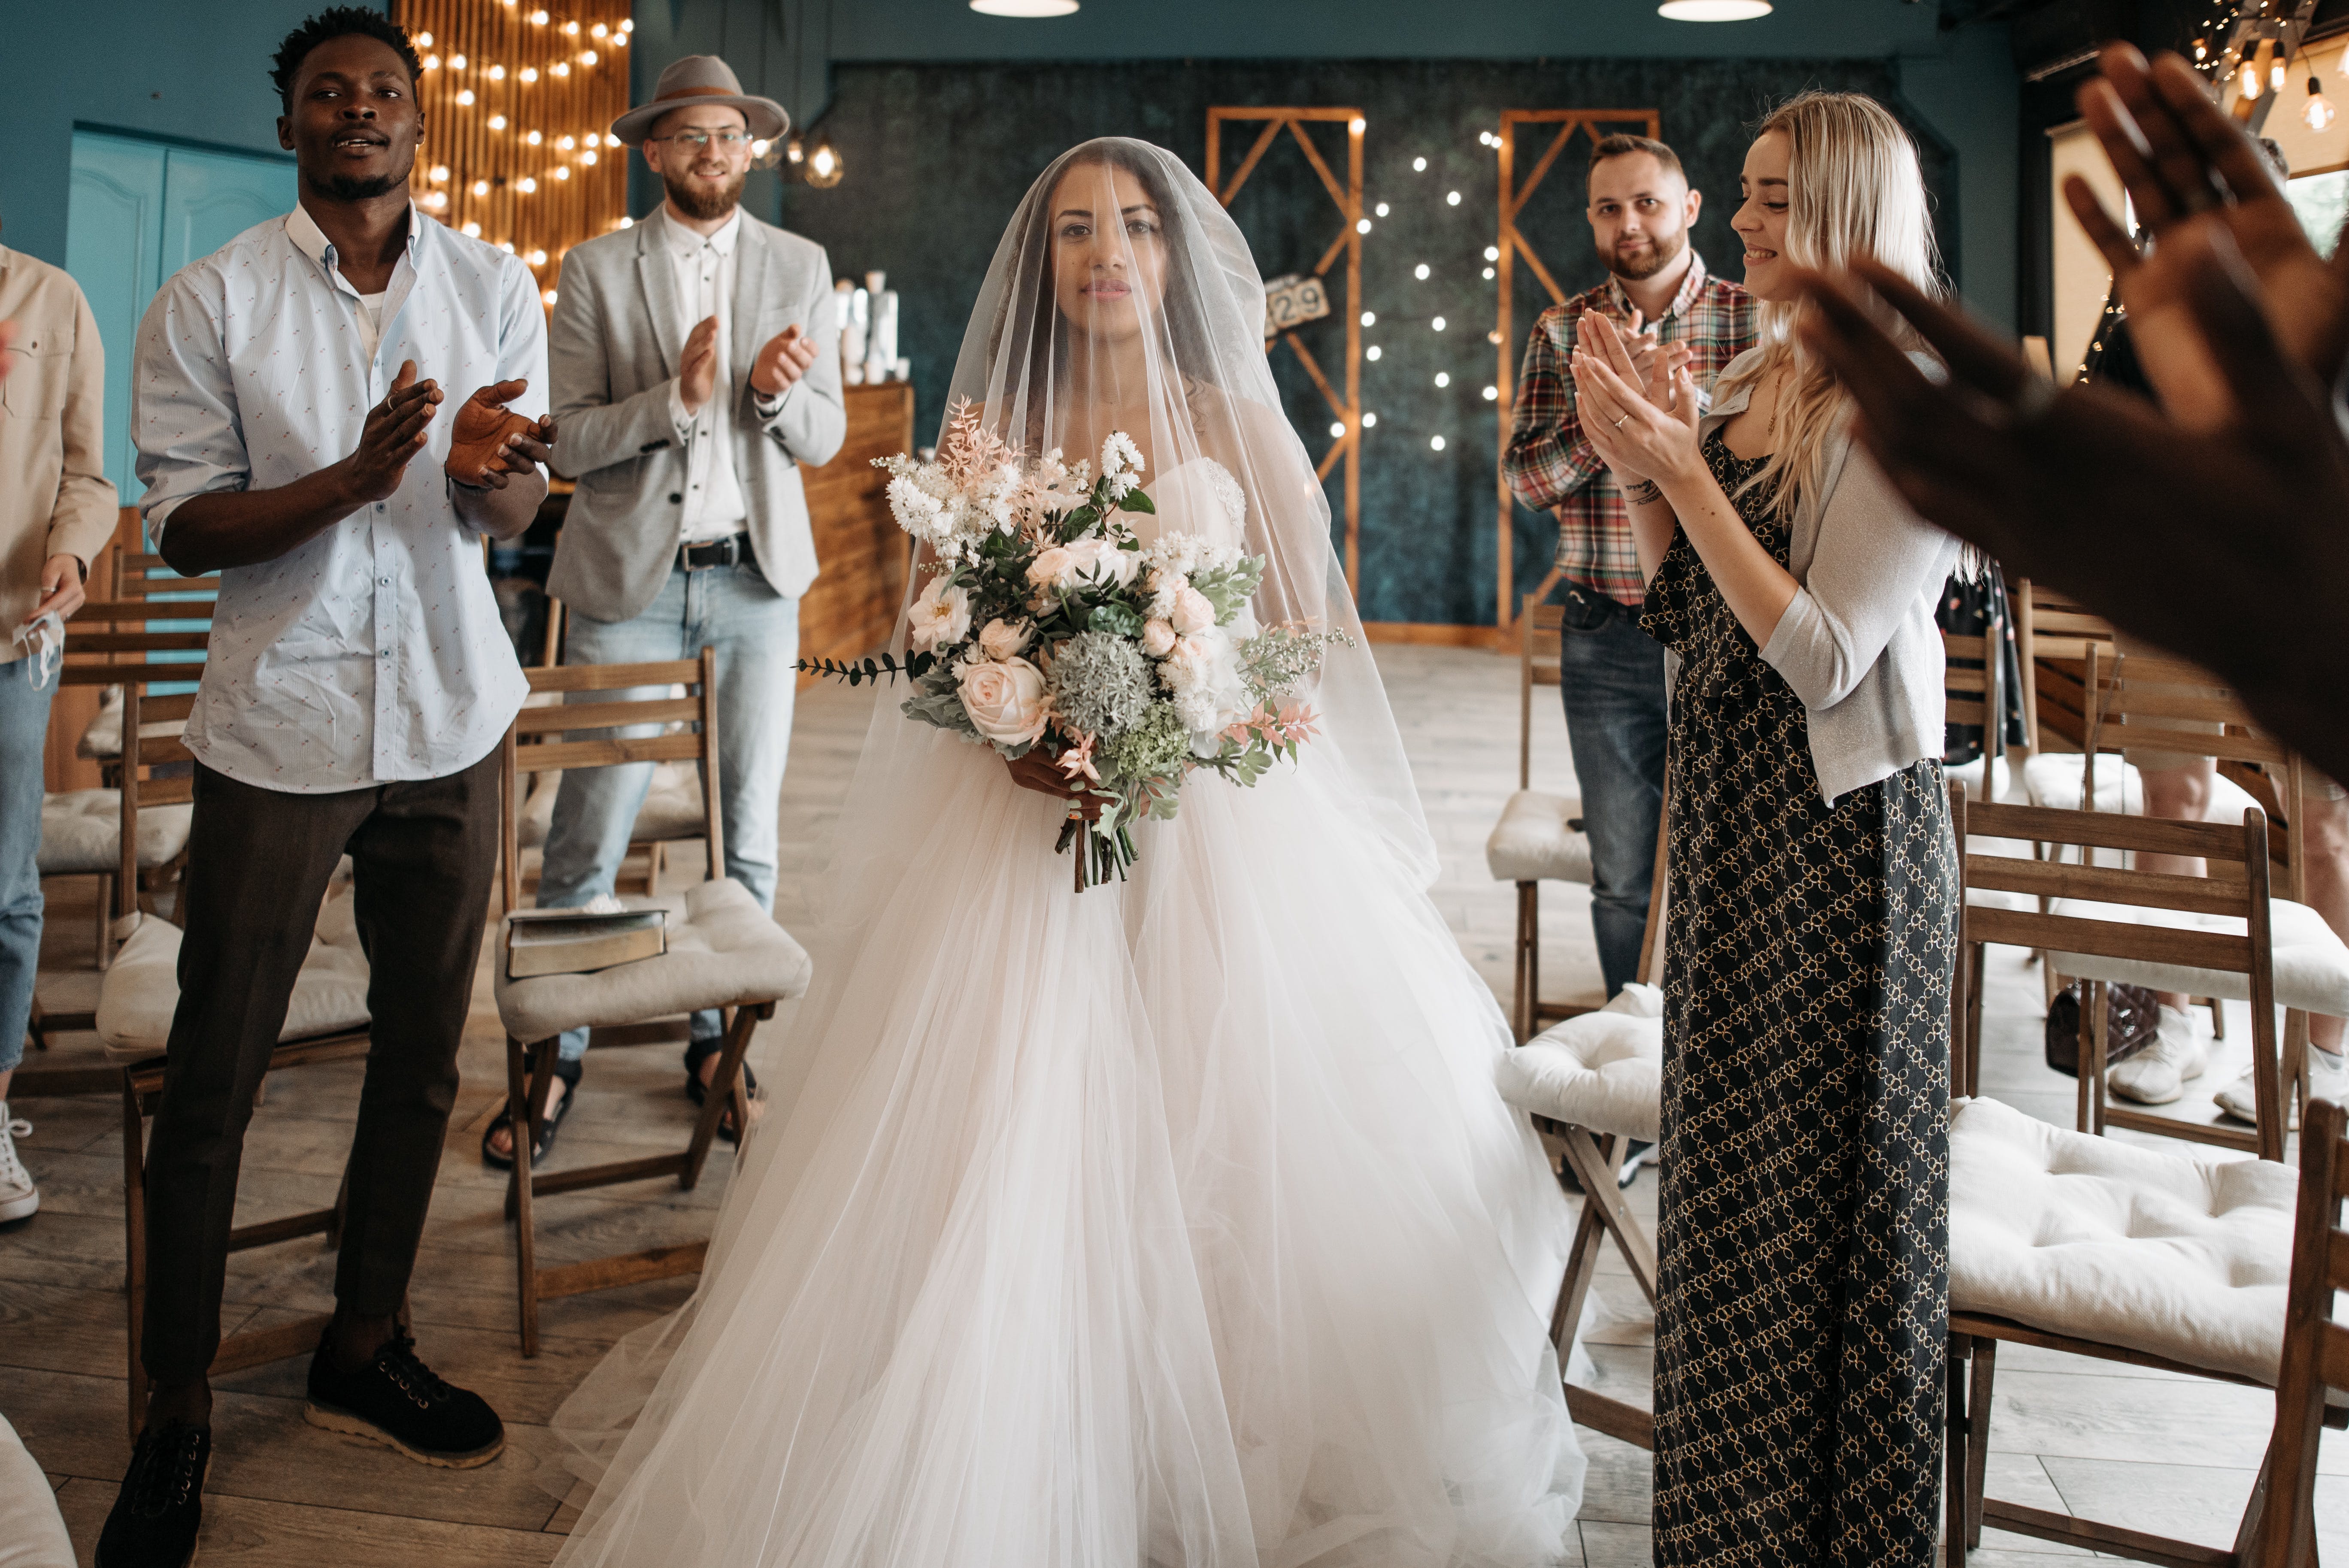 Guests clapping their hands and standing for the bride | Source: Pexels